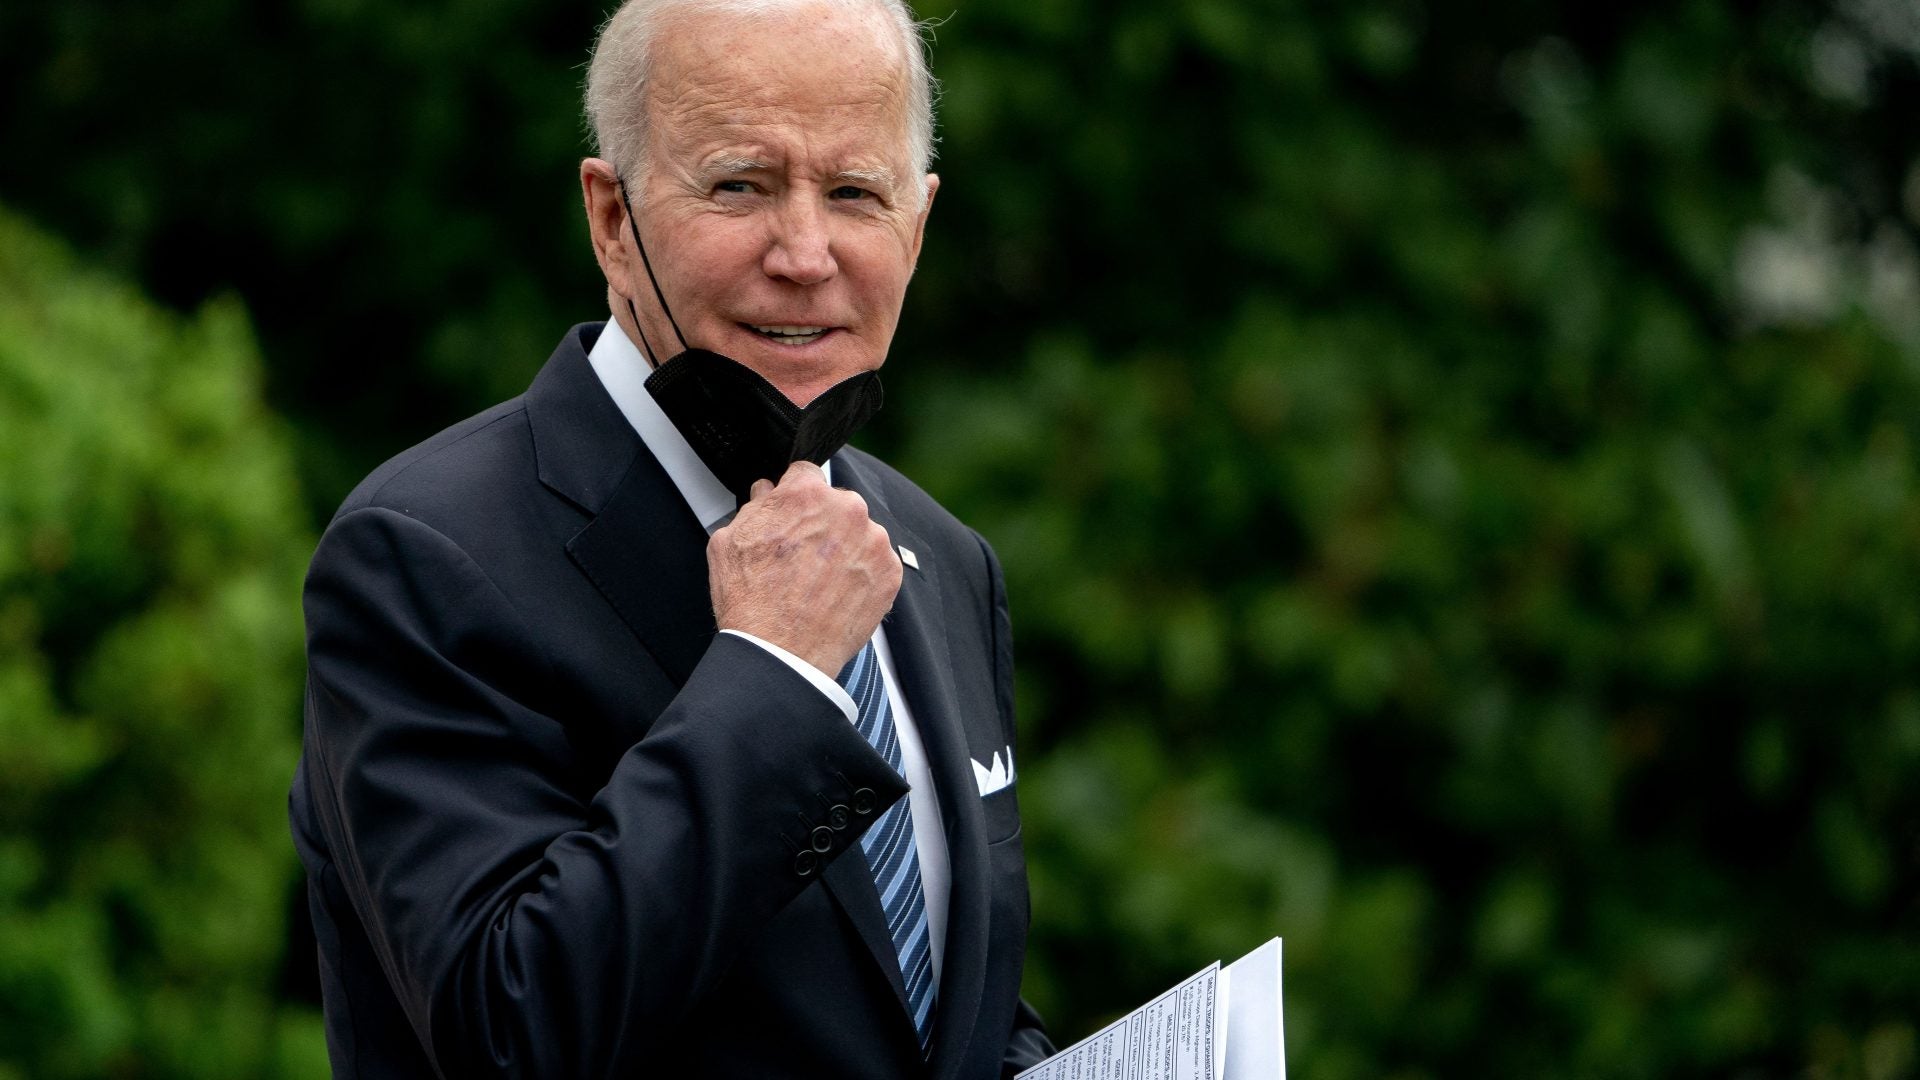 President Biden Says, ‘A Woman’s Right To Choose Is Fundamental’ After Supreme Court Draft Leak